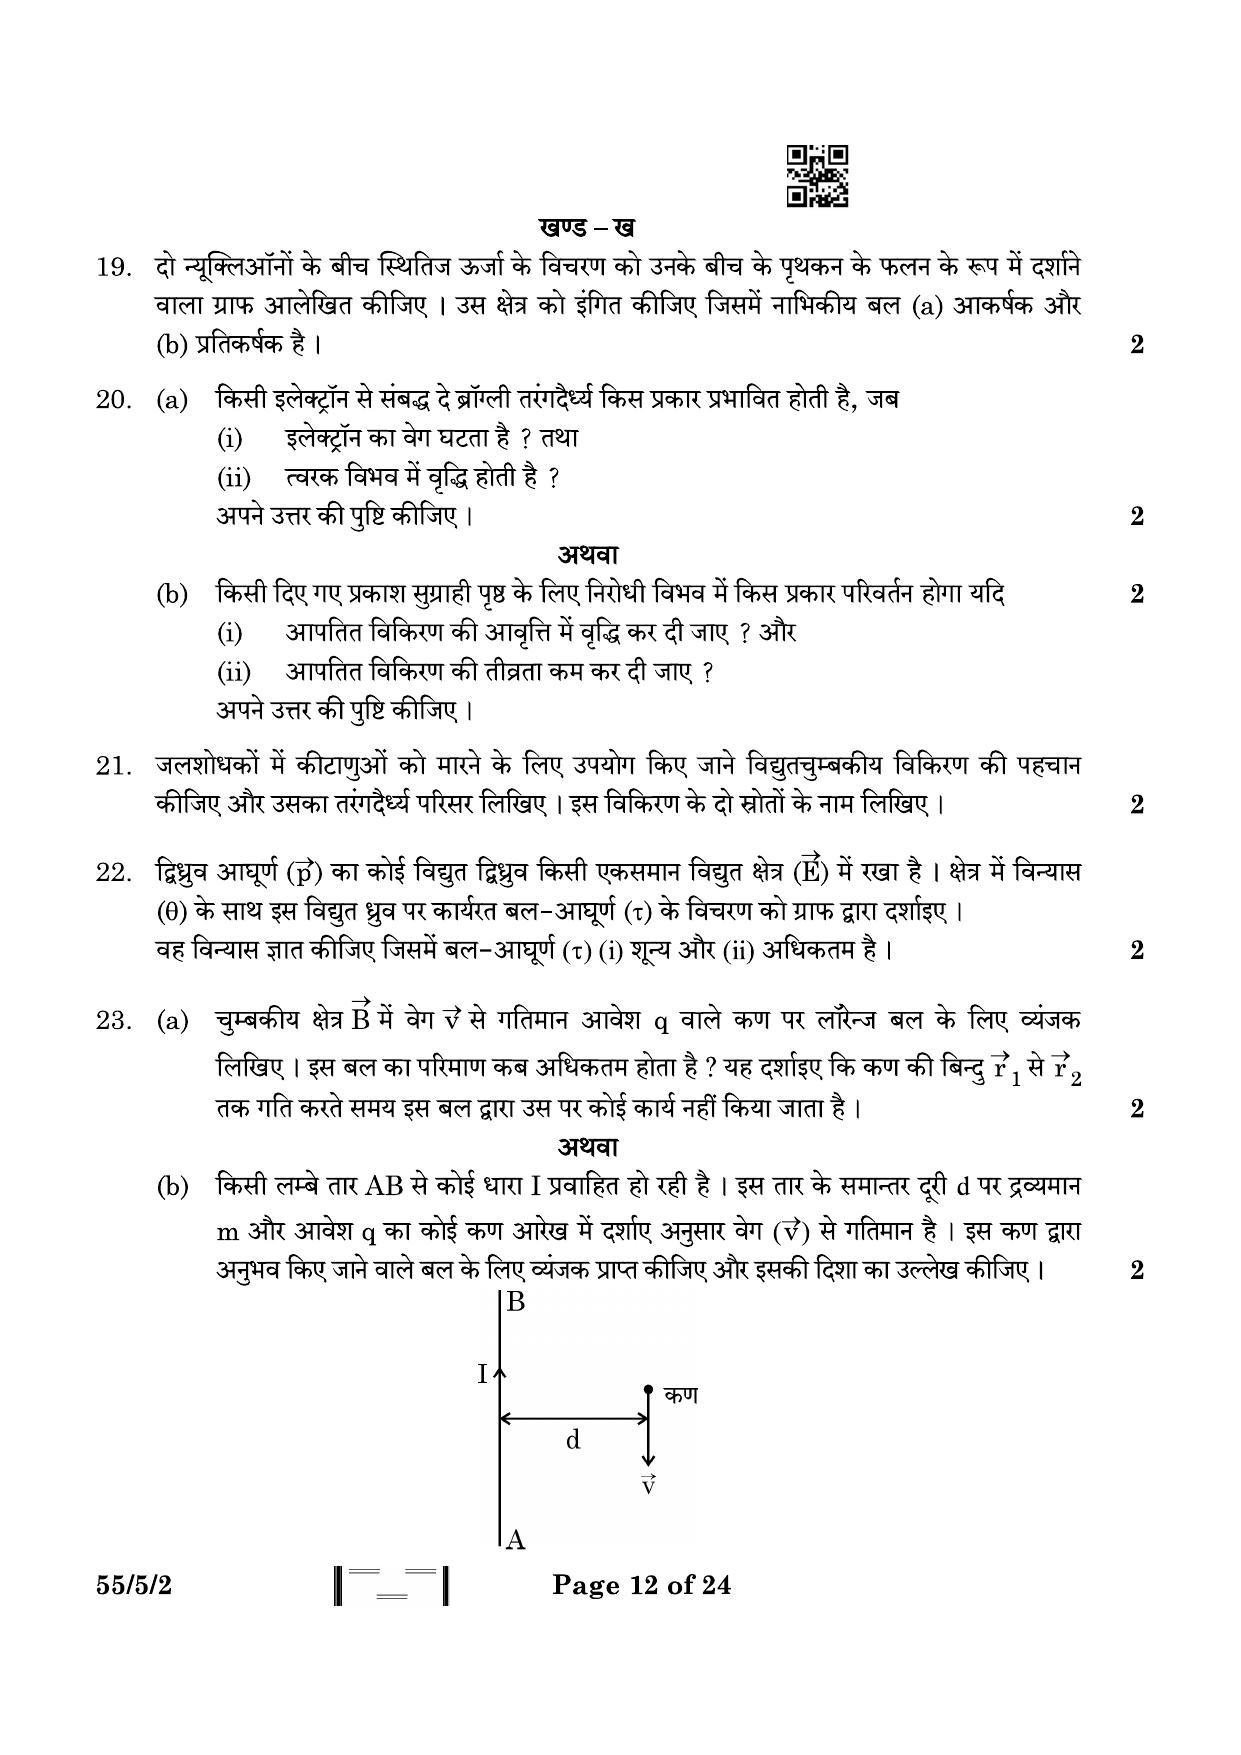 CBSE Class 12 55-5-2 Physics 2023 Question Paper - Page 12